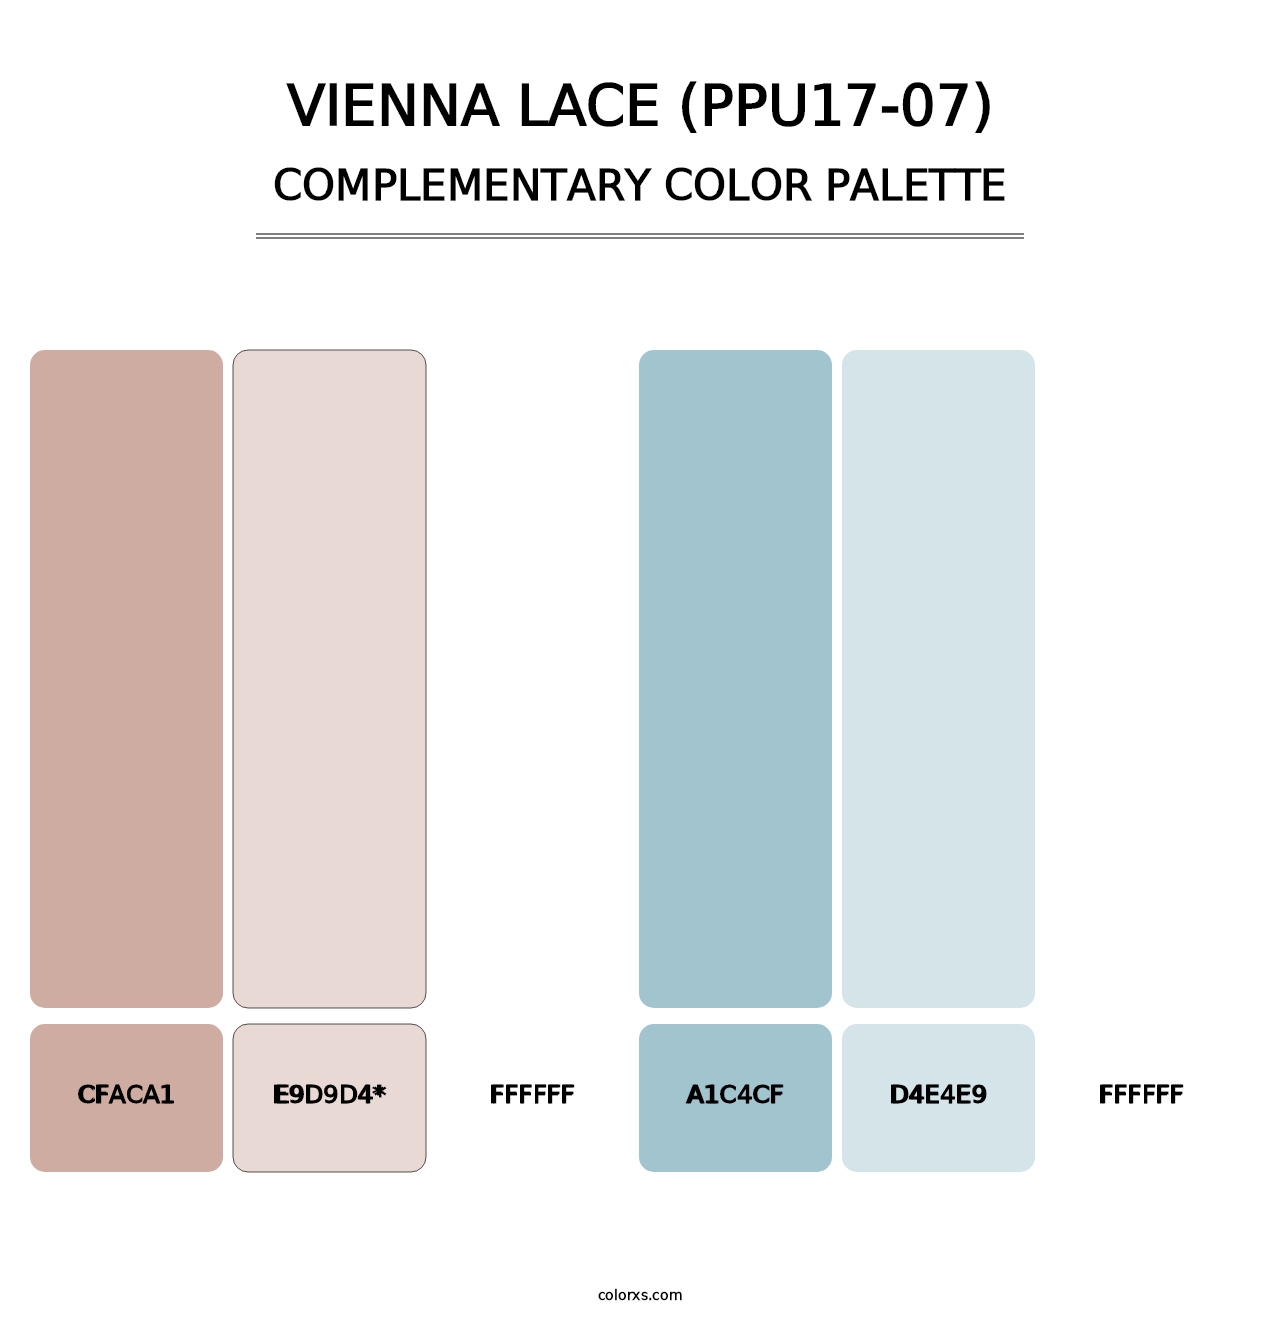 Vienna Lace (PPU17-07) - Complementary Color Palette